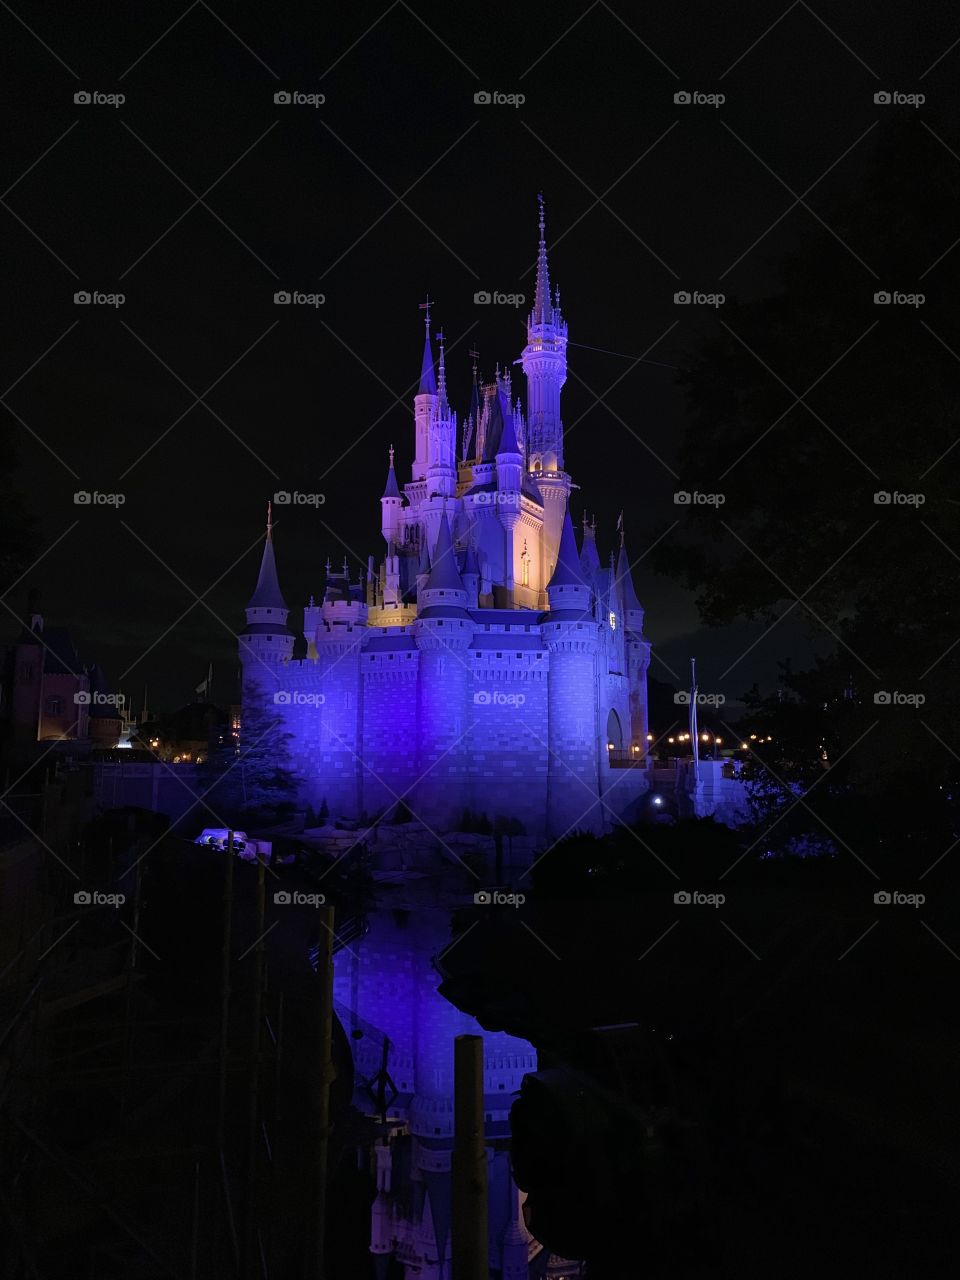 #day124 Everyday WDW Orlando Florida.  I have been lost on Disney Properties consecutively since 4/3/19 You can find my encounter https://www.facebook.com/selsa.susanna or on IG selsa_susanna Disney’s Magic Kingdom 8-4-19 Sunday 